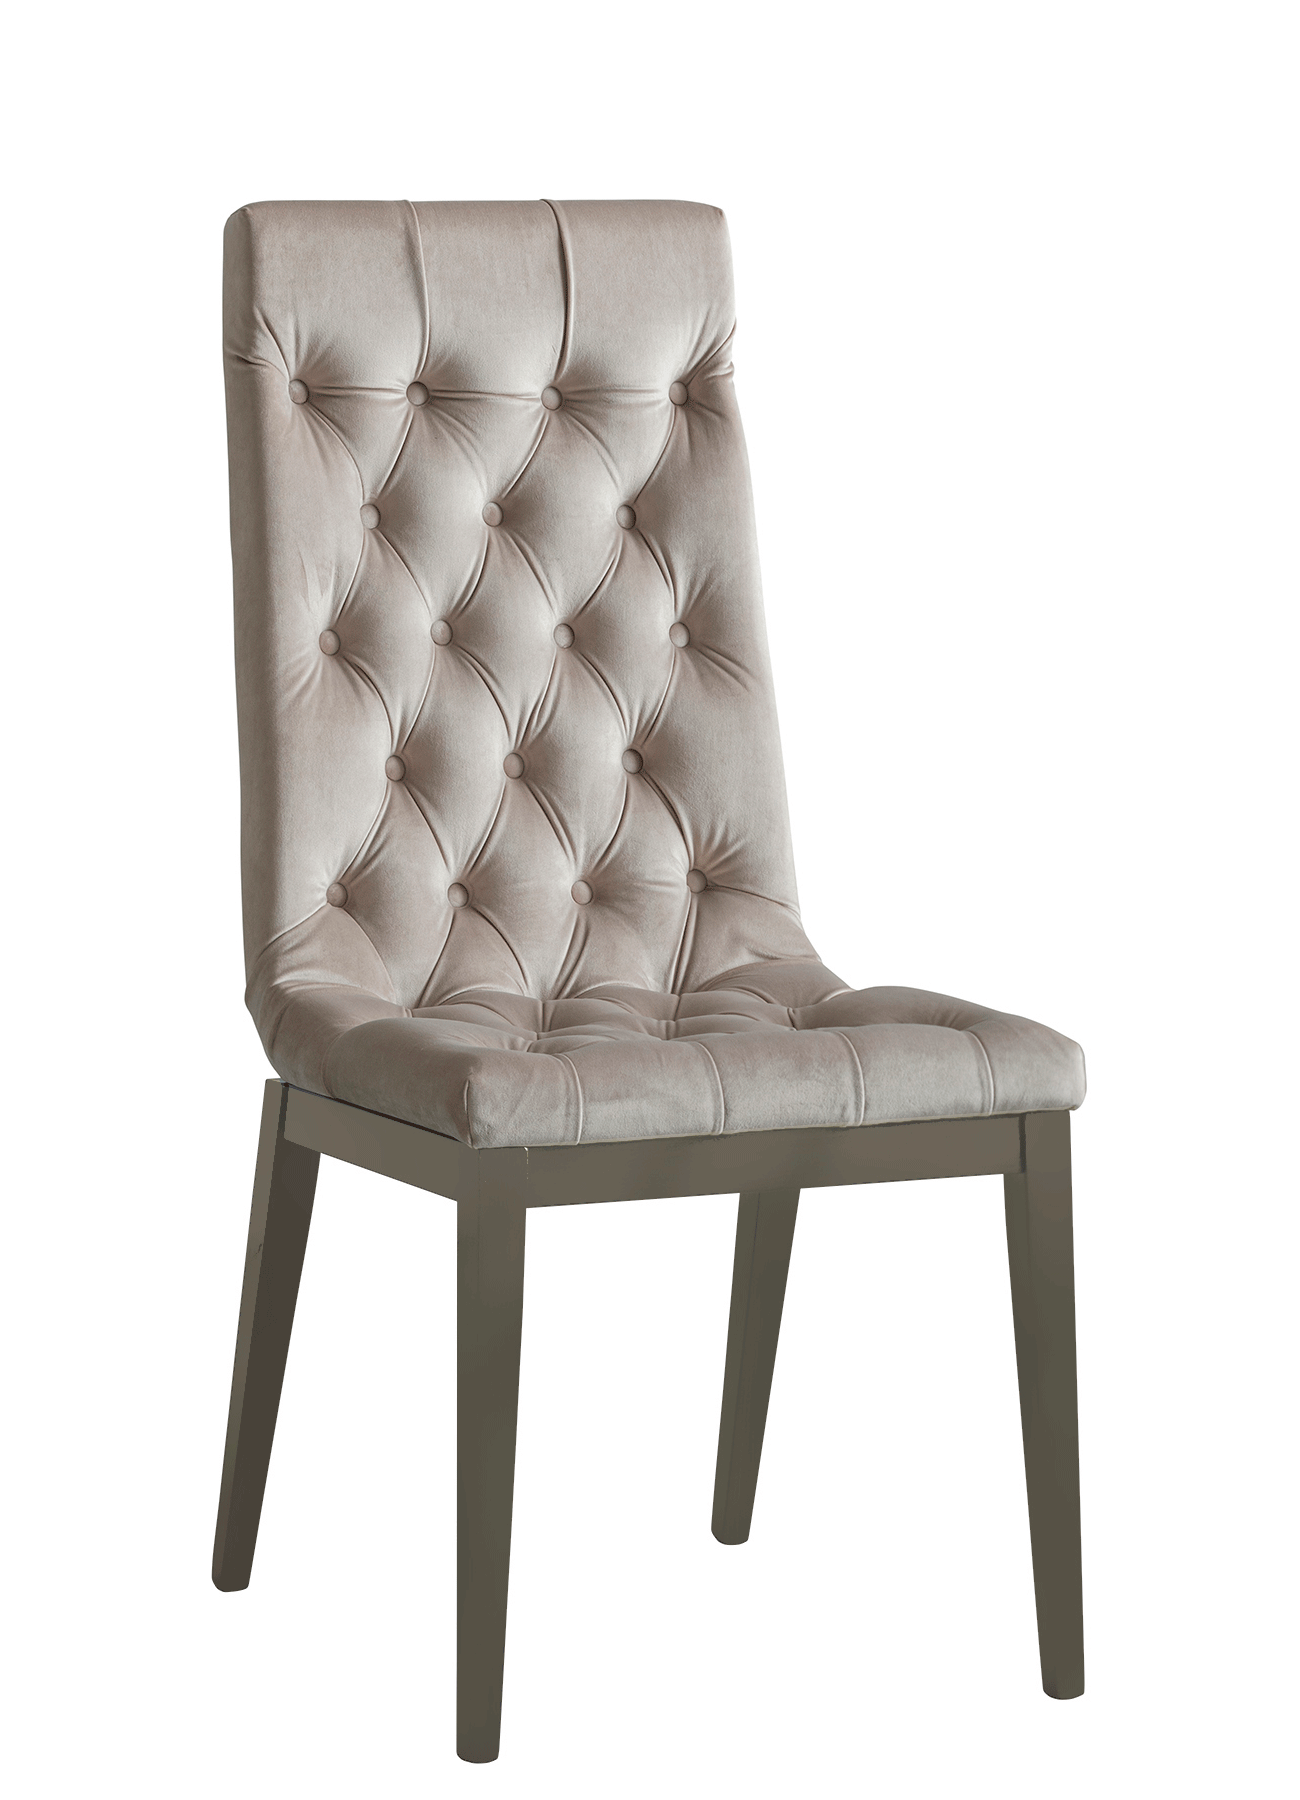 Dining Room Furniture Classic Dining Room Sets Volare chair GREY